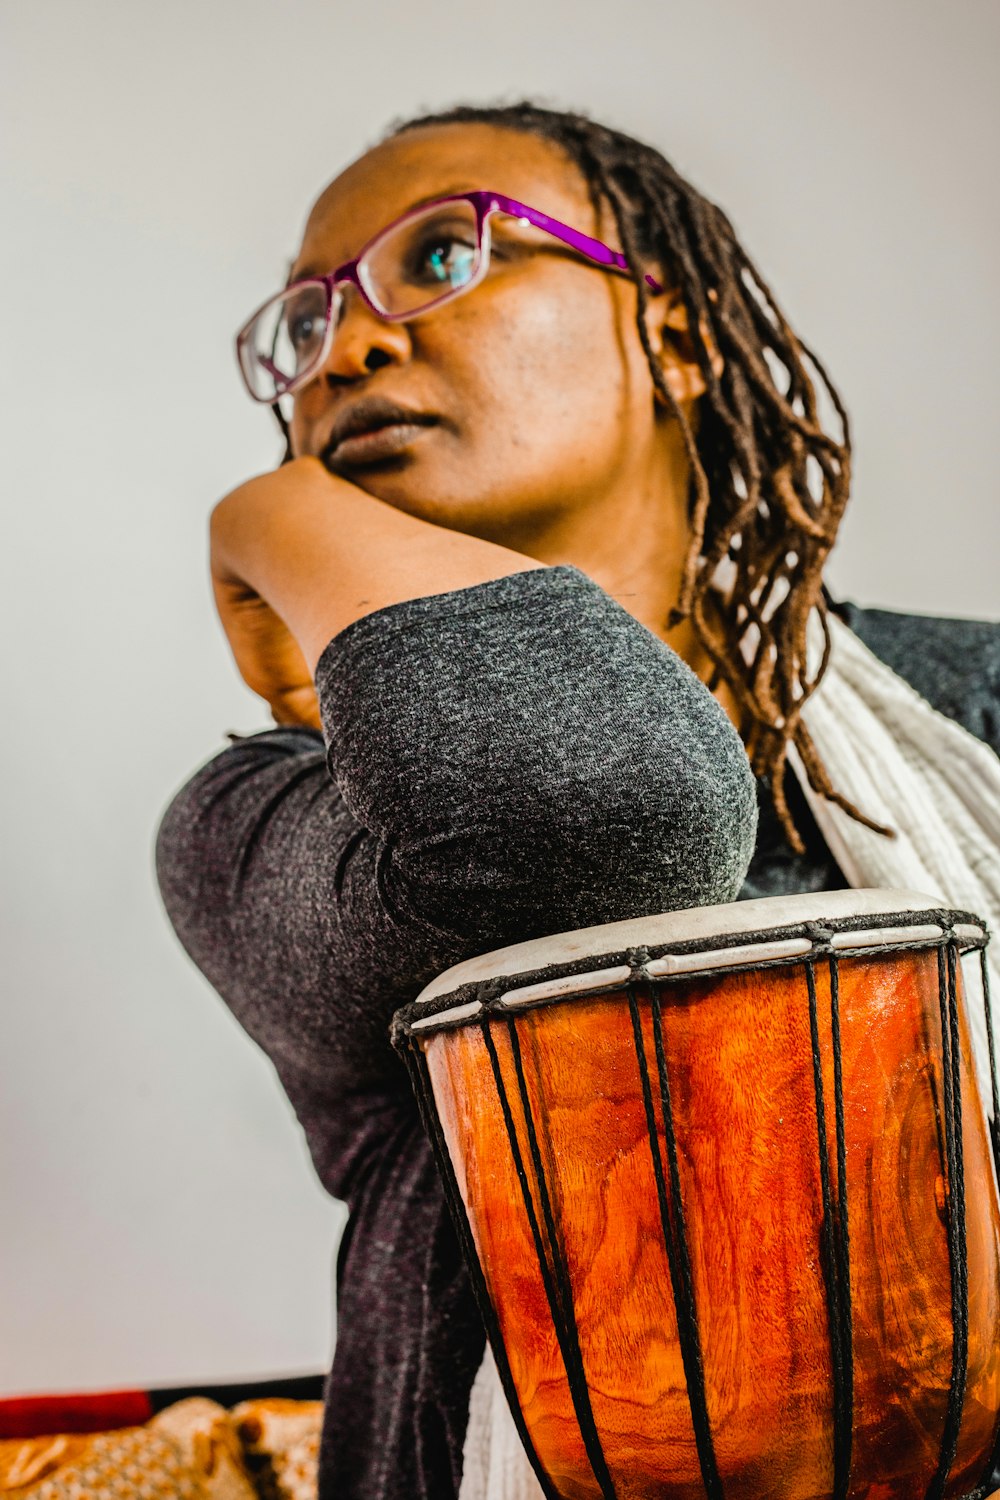 a woman with glasses is holding a drum